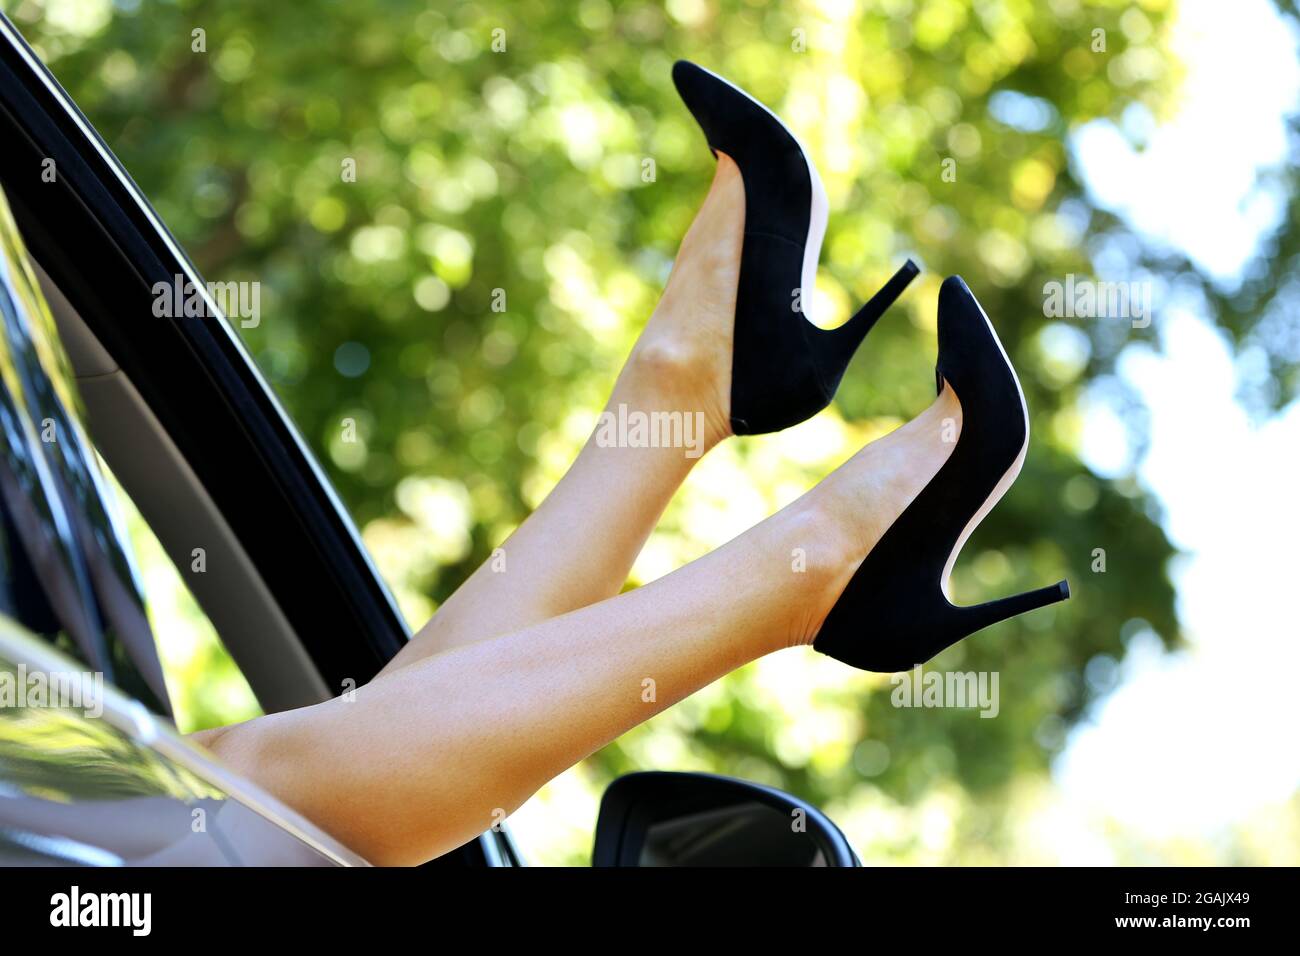 Woman's legs out of the car window Stock Photo - Alamy